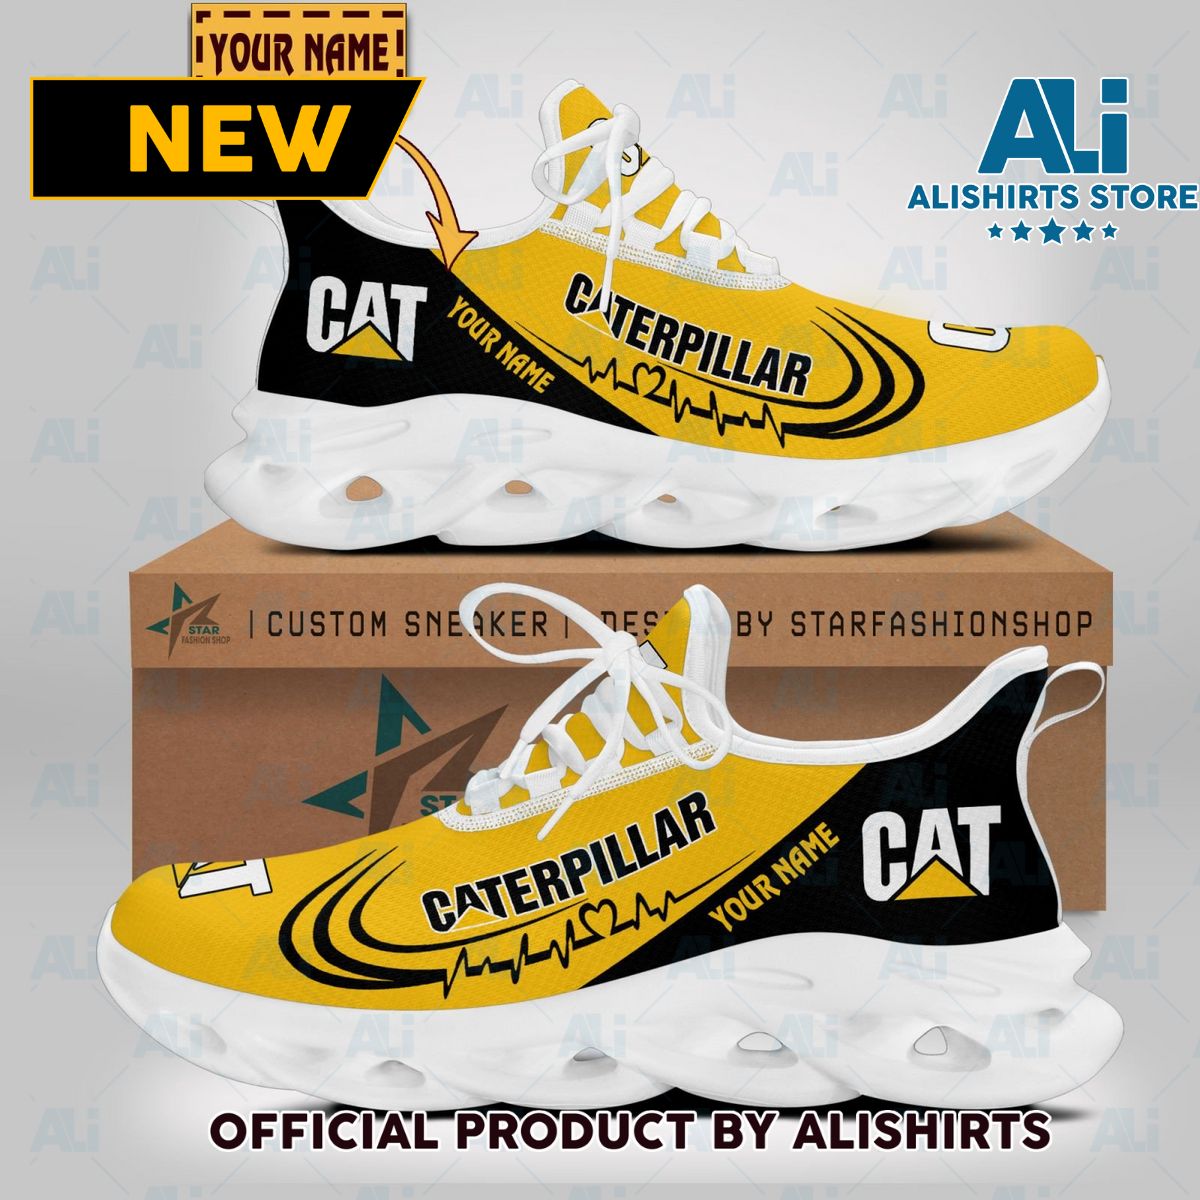 Caterpillar Inc Car Brand Lover Clunky Sneaker Max Soul Shoes